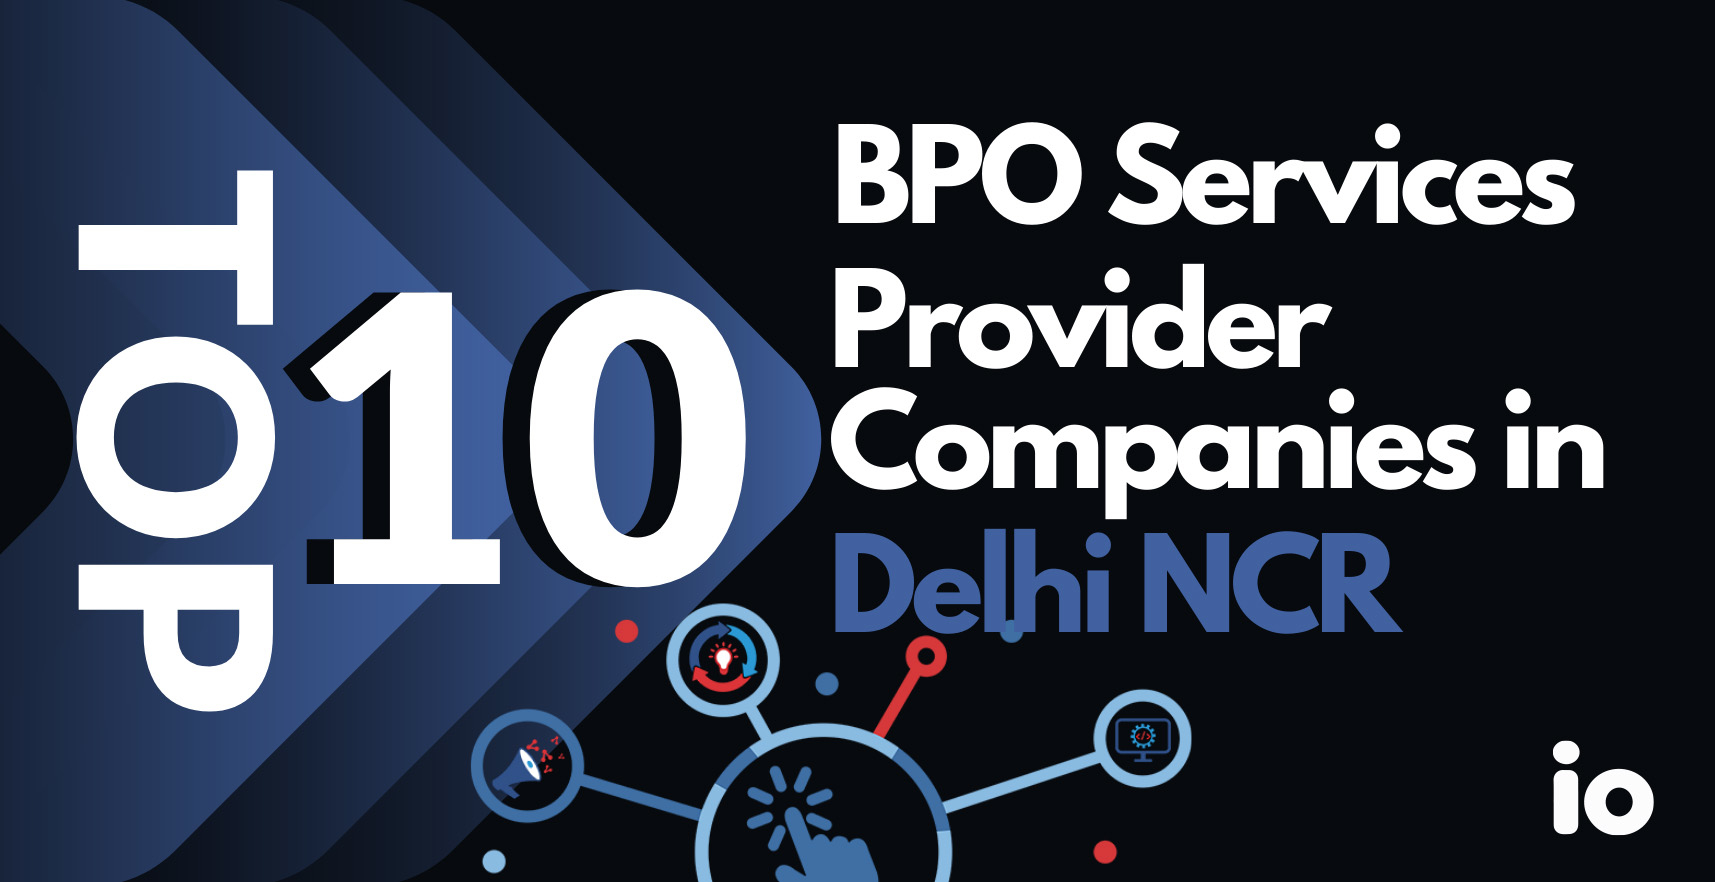 Business Process Outsourcing Services Provider Companies